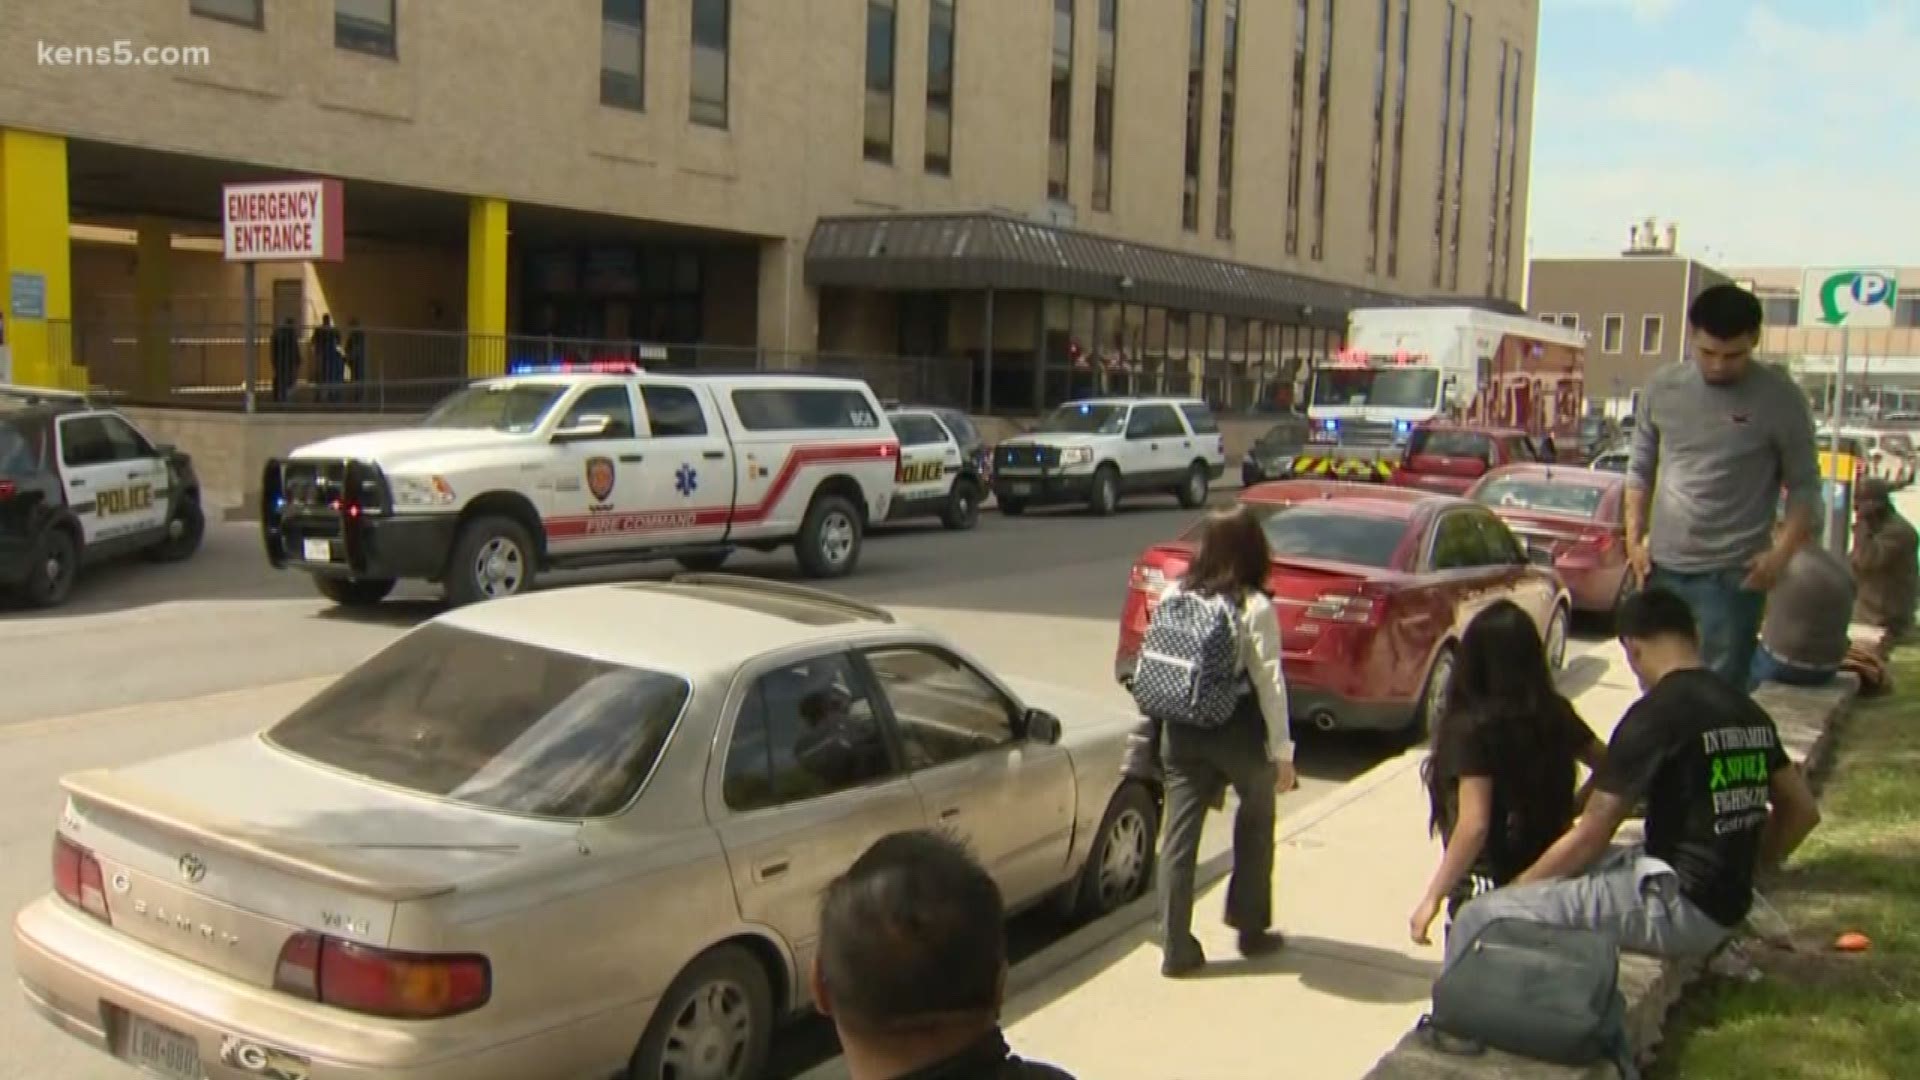 Authorities have given the all-clear on a lockdown at Baptist Hospital Medical Center caused by a "hoax bomb threat" made at the downtown campus. Fire department PIO Joe Arrington told reporters that the package located on the ground floor was a "standard piece of hospital equipment" that had been located out of place.